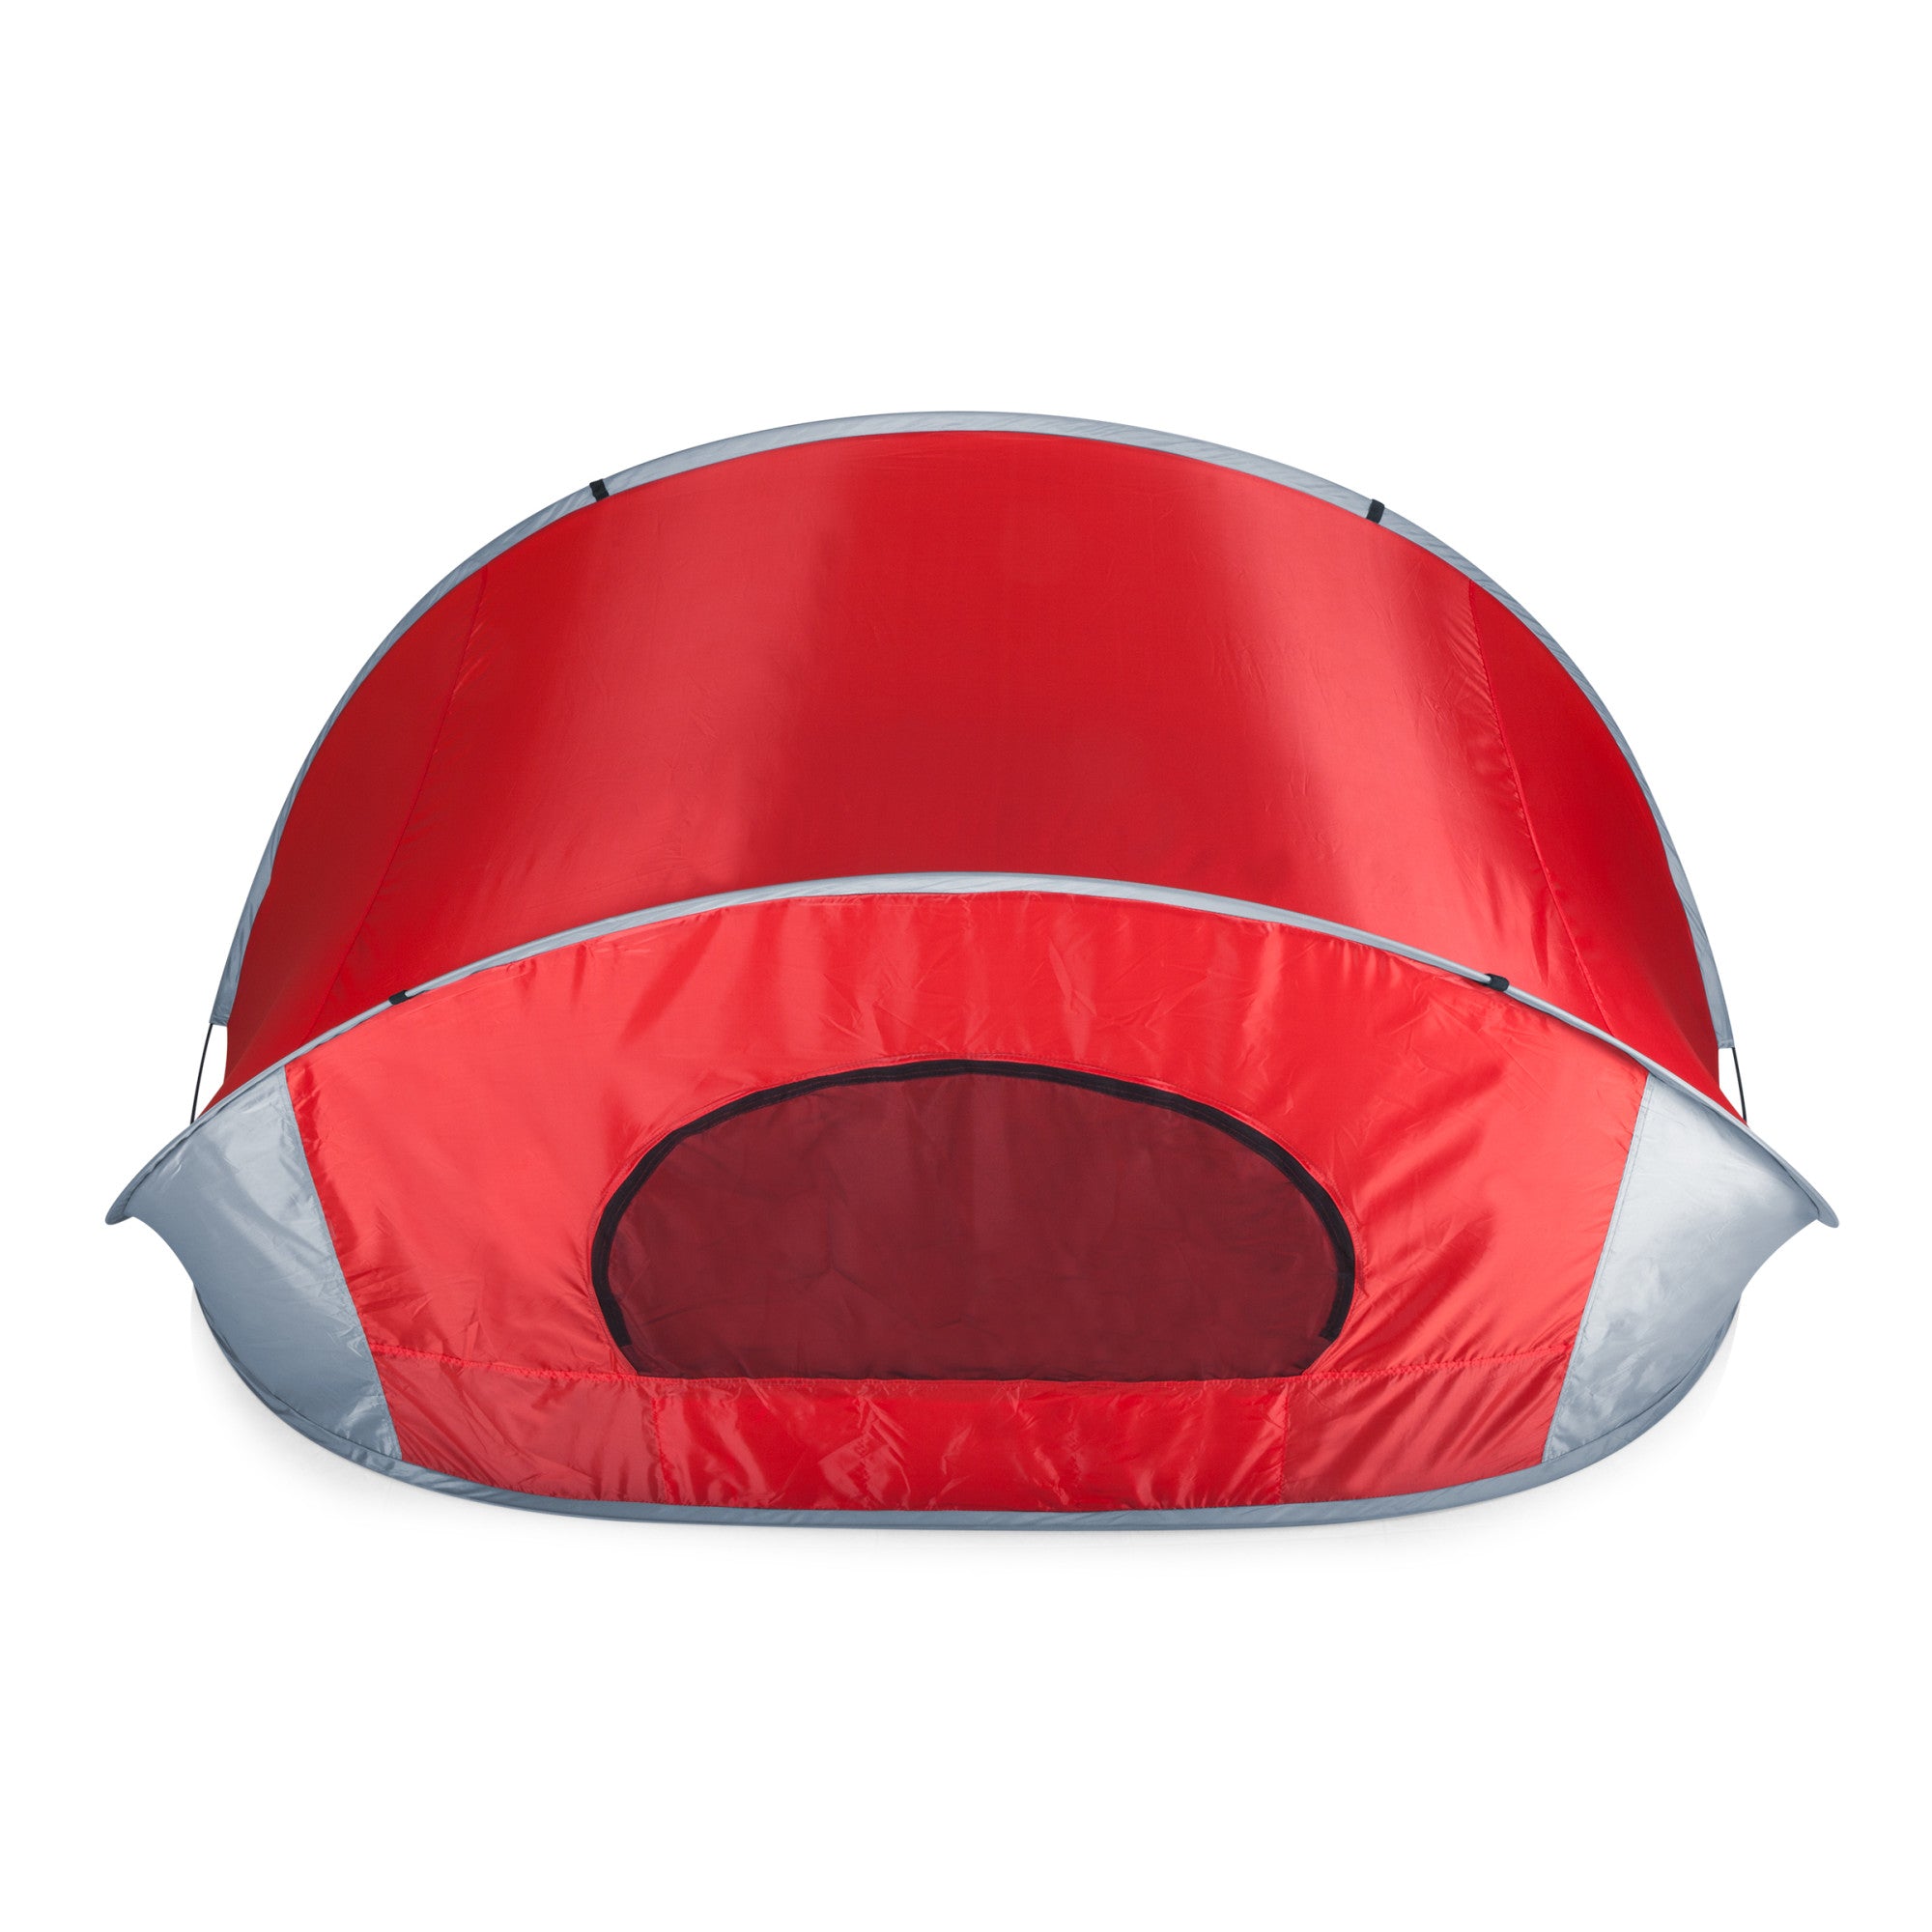 Manta Portable Beach Tent – PICNIC TIME FAMILY OF BRANDS